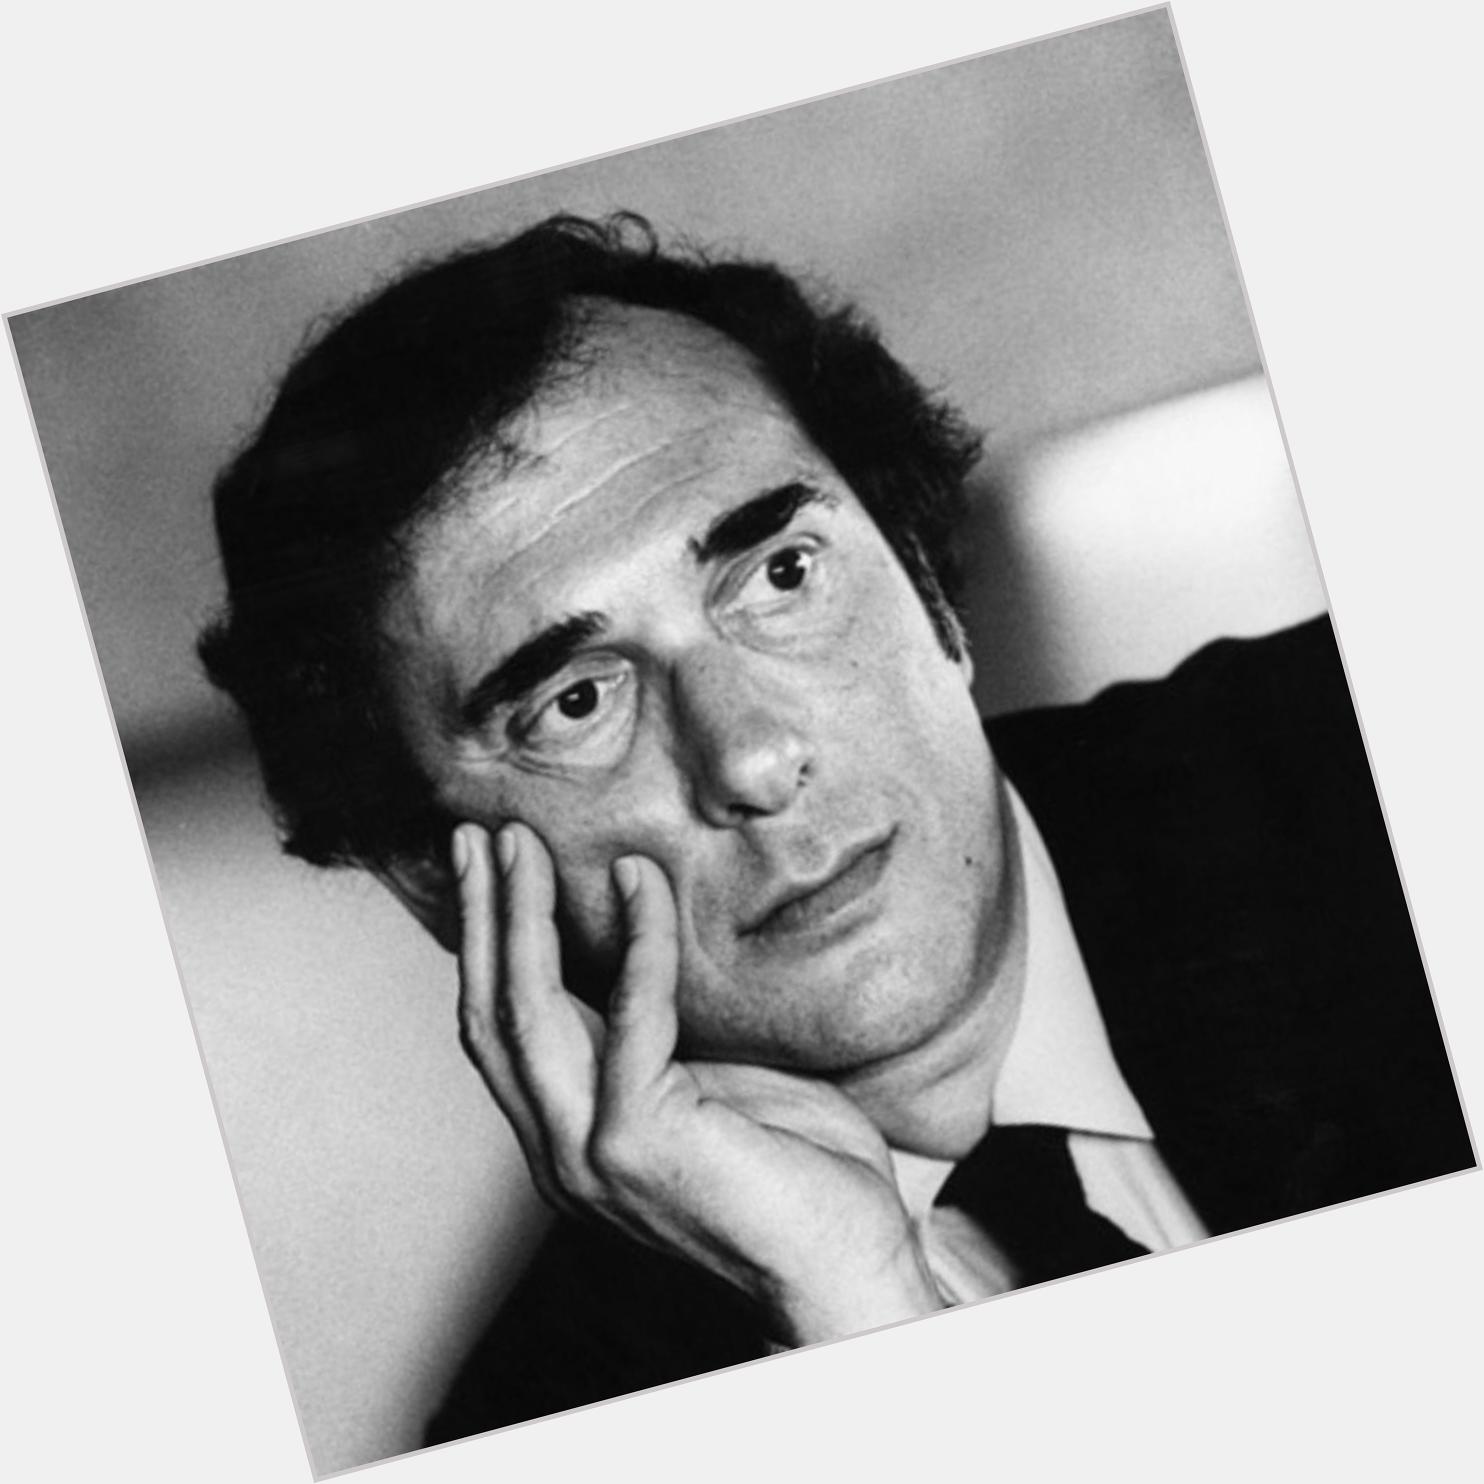 Happy Birthday to Nobel Prize winner Harold Pinter, 85 years young today who lives on through his many plays. 